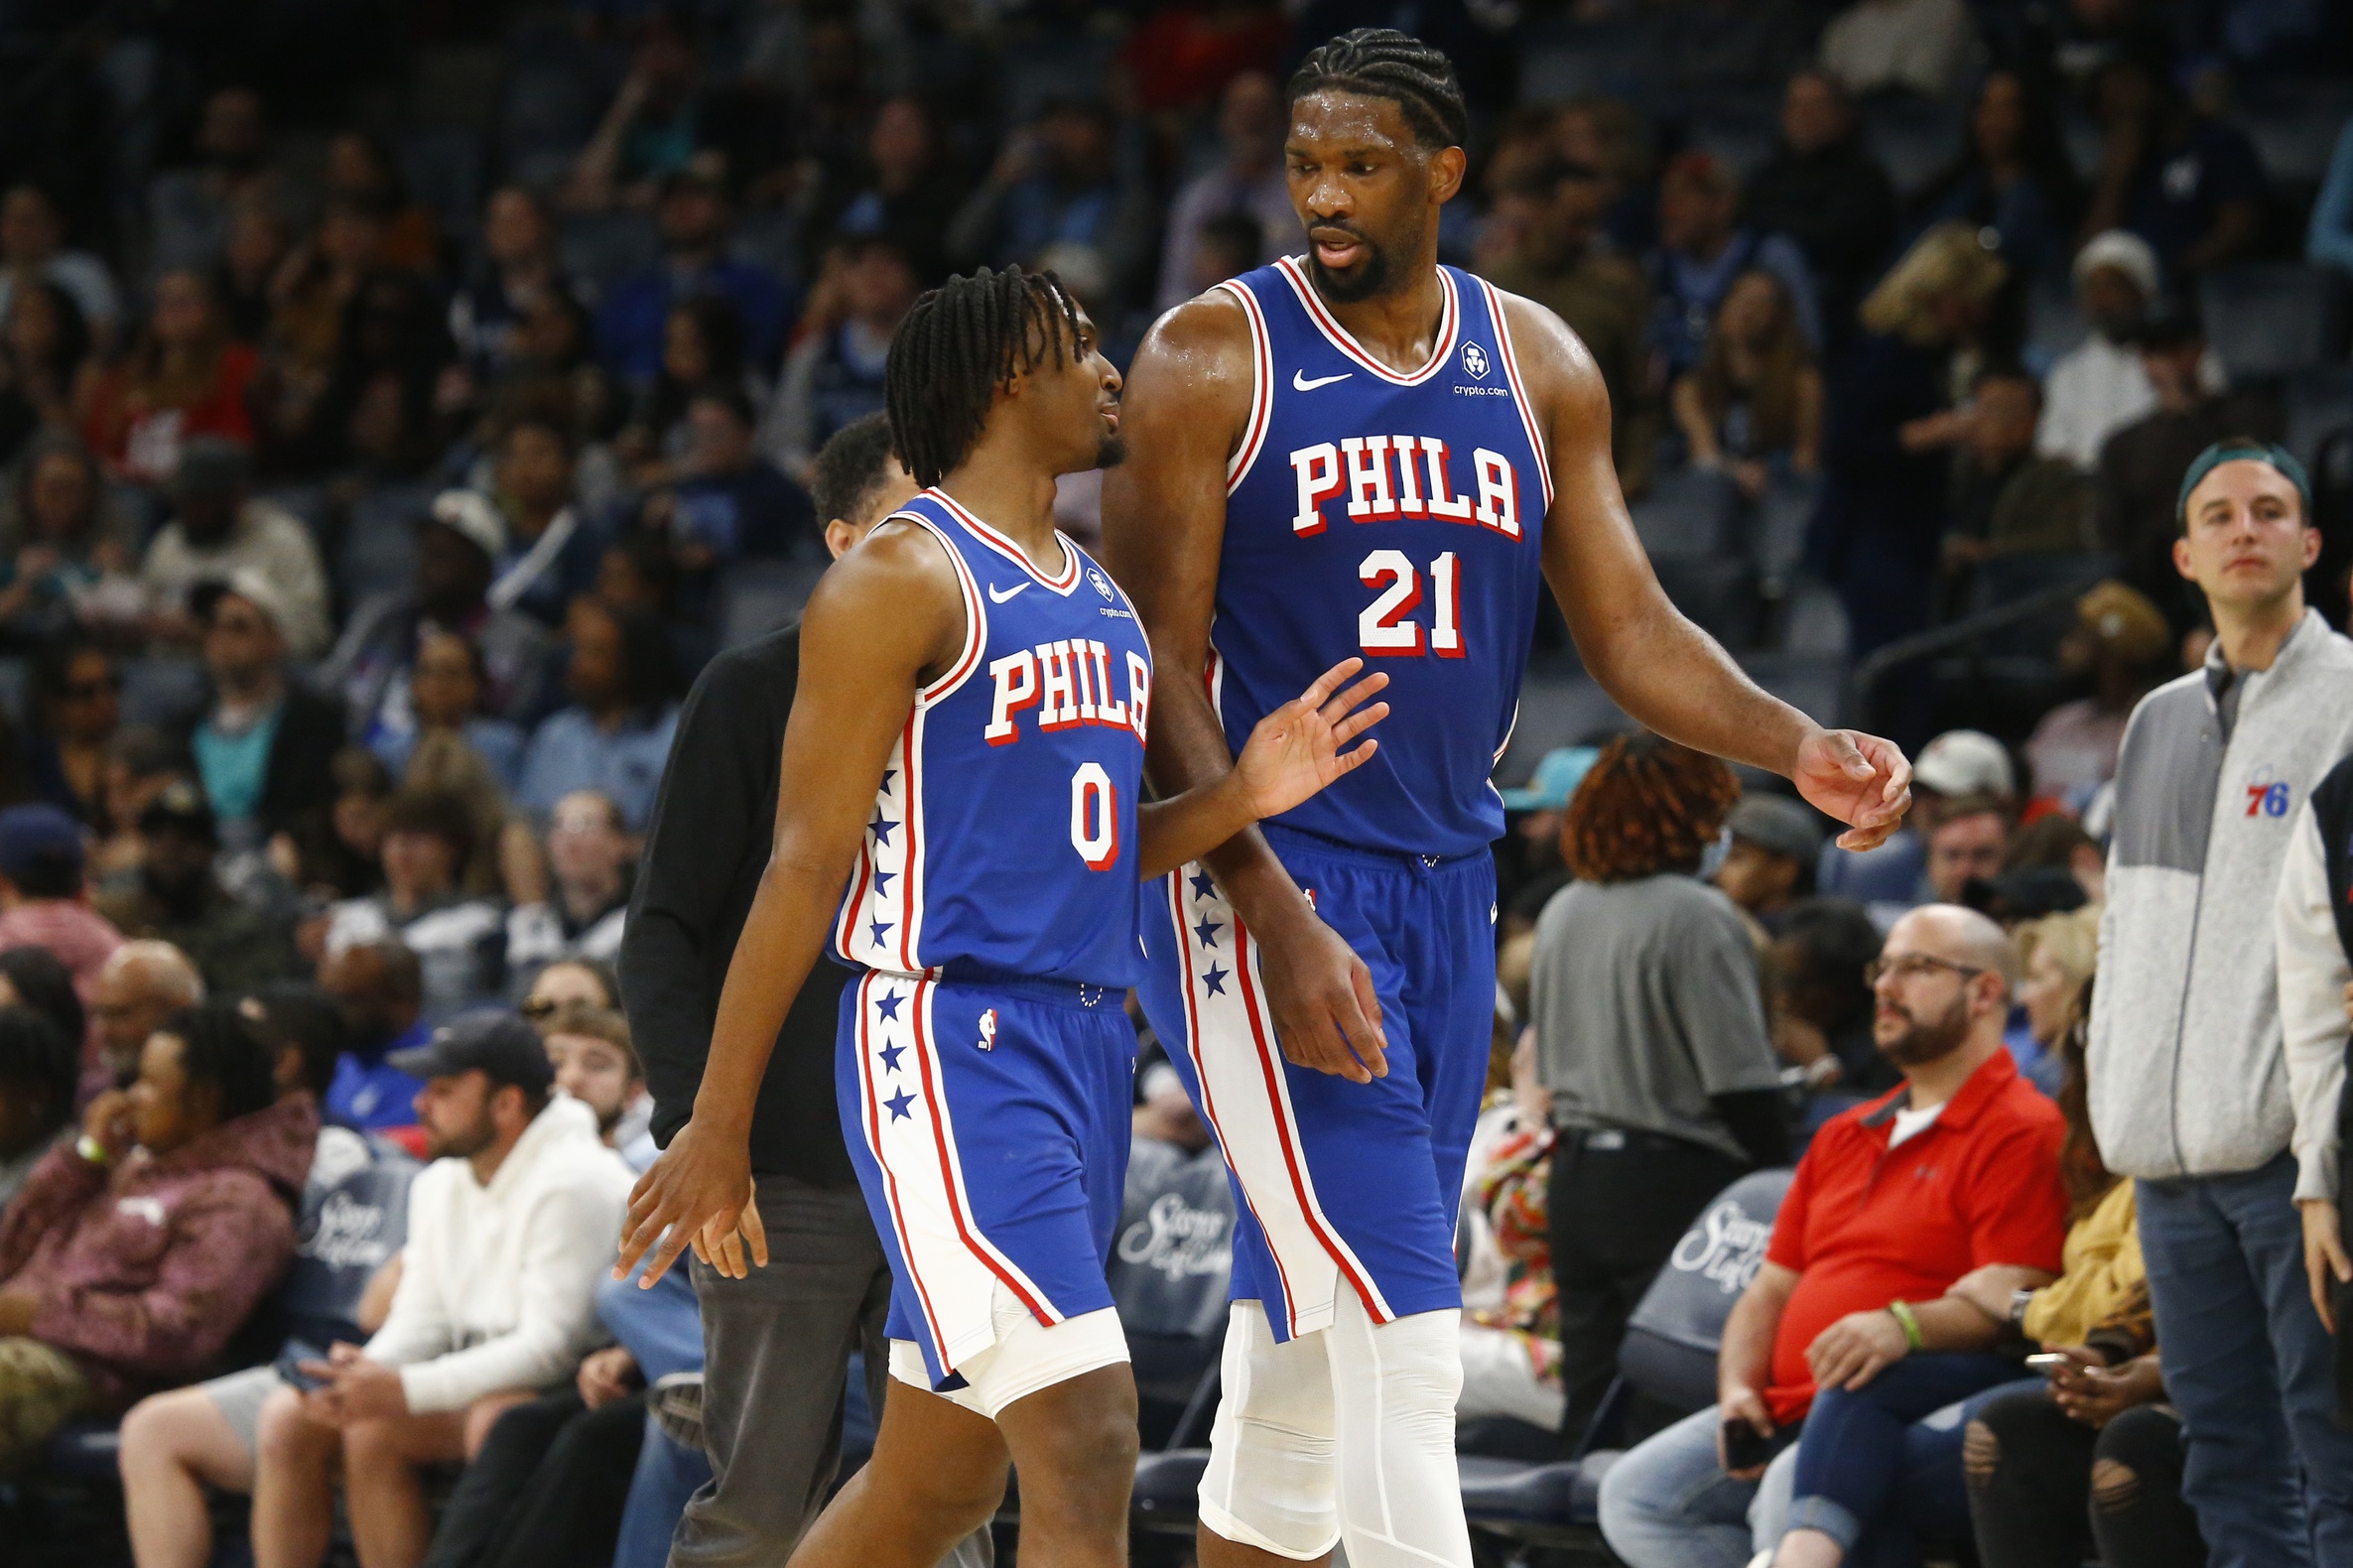 The 76ers are one of the teams with the most pressure heading into this upcoming season.